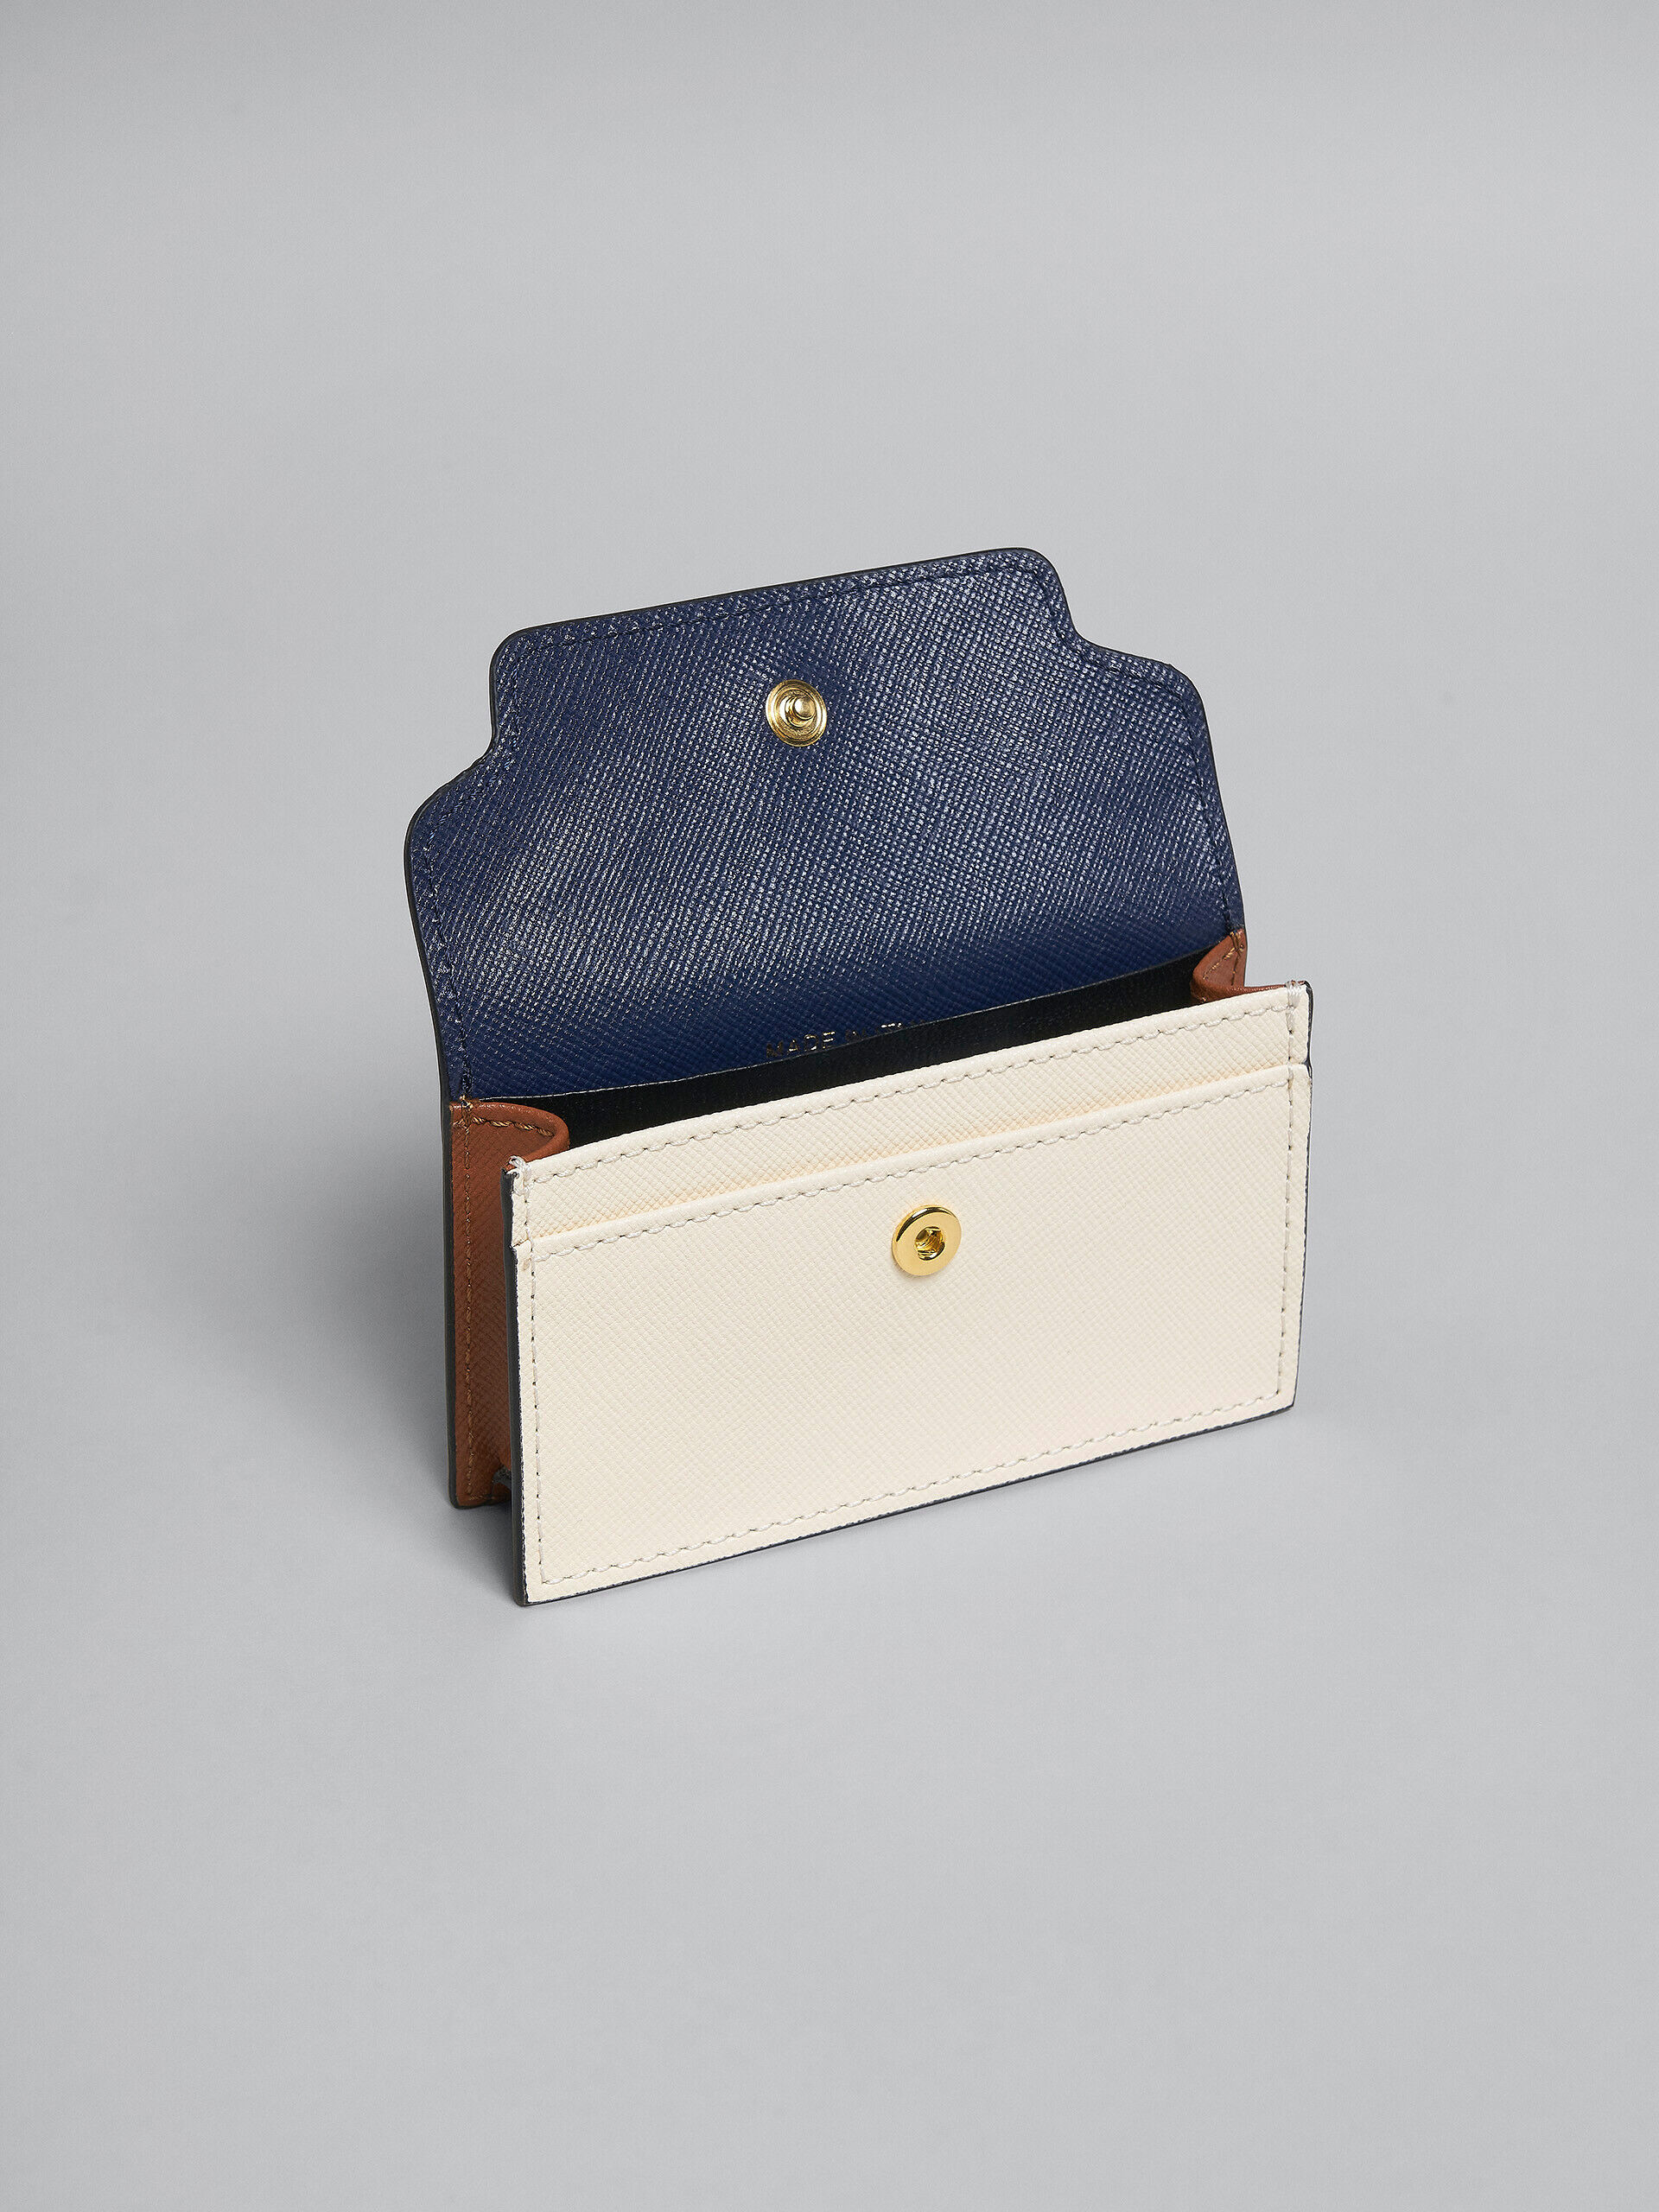 Blue white and brown saffiano leather business card case | Marni